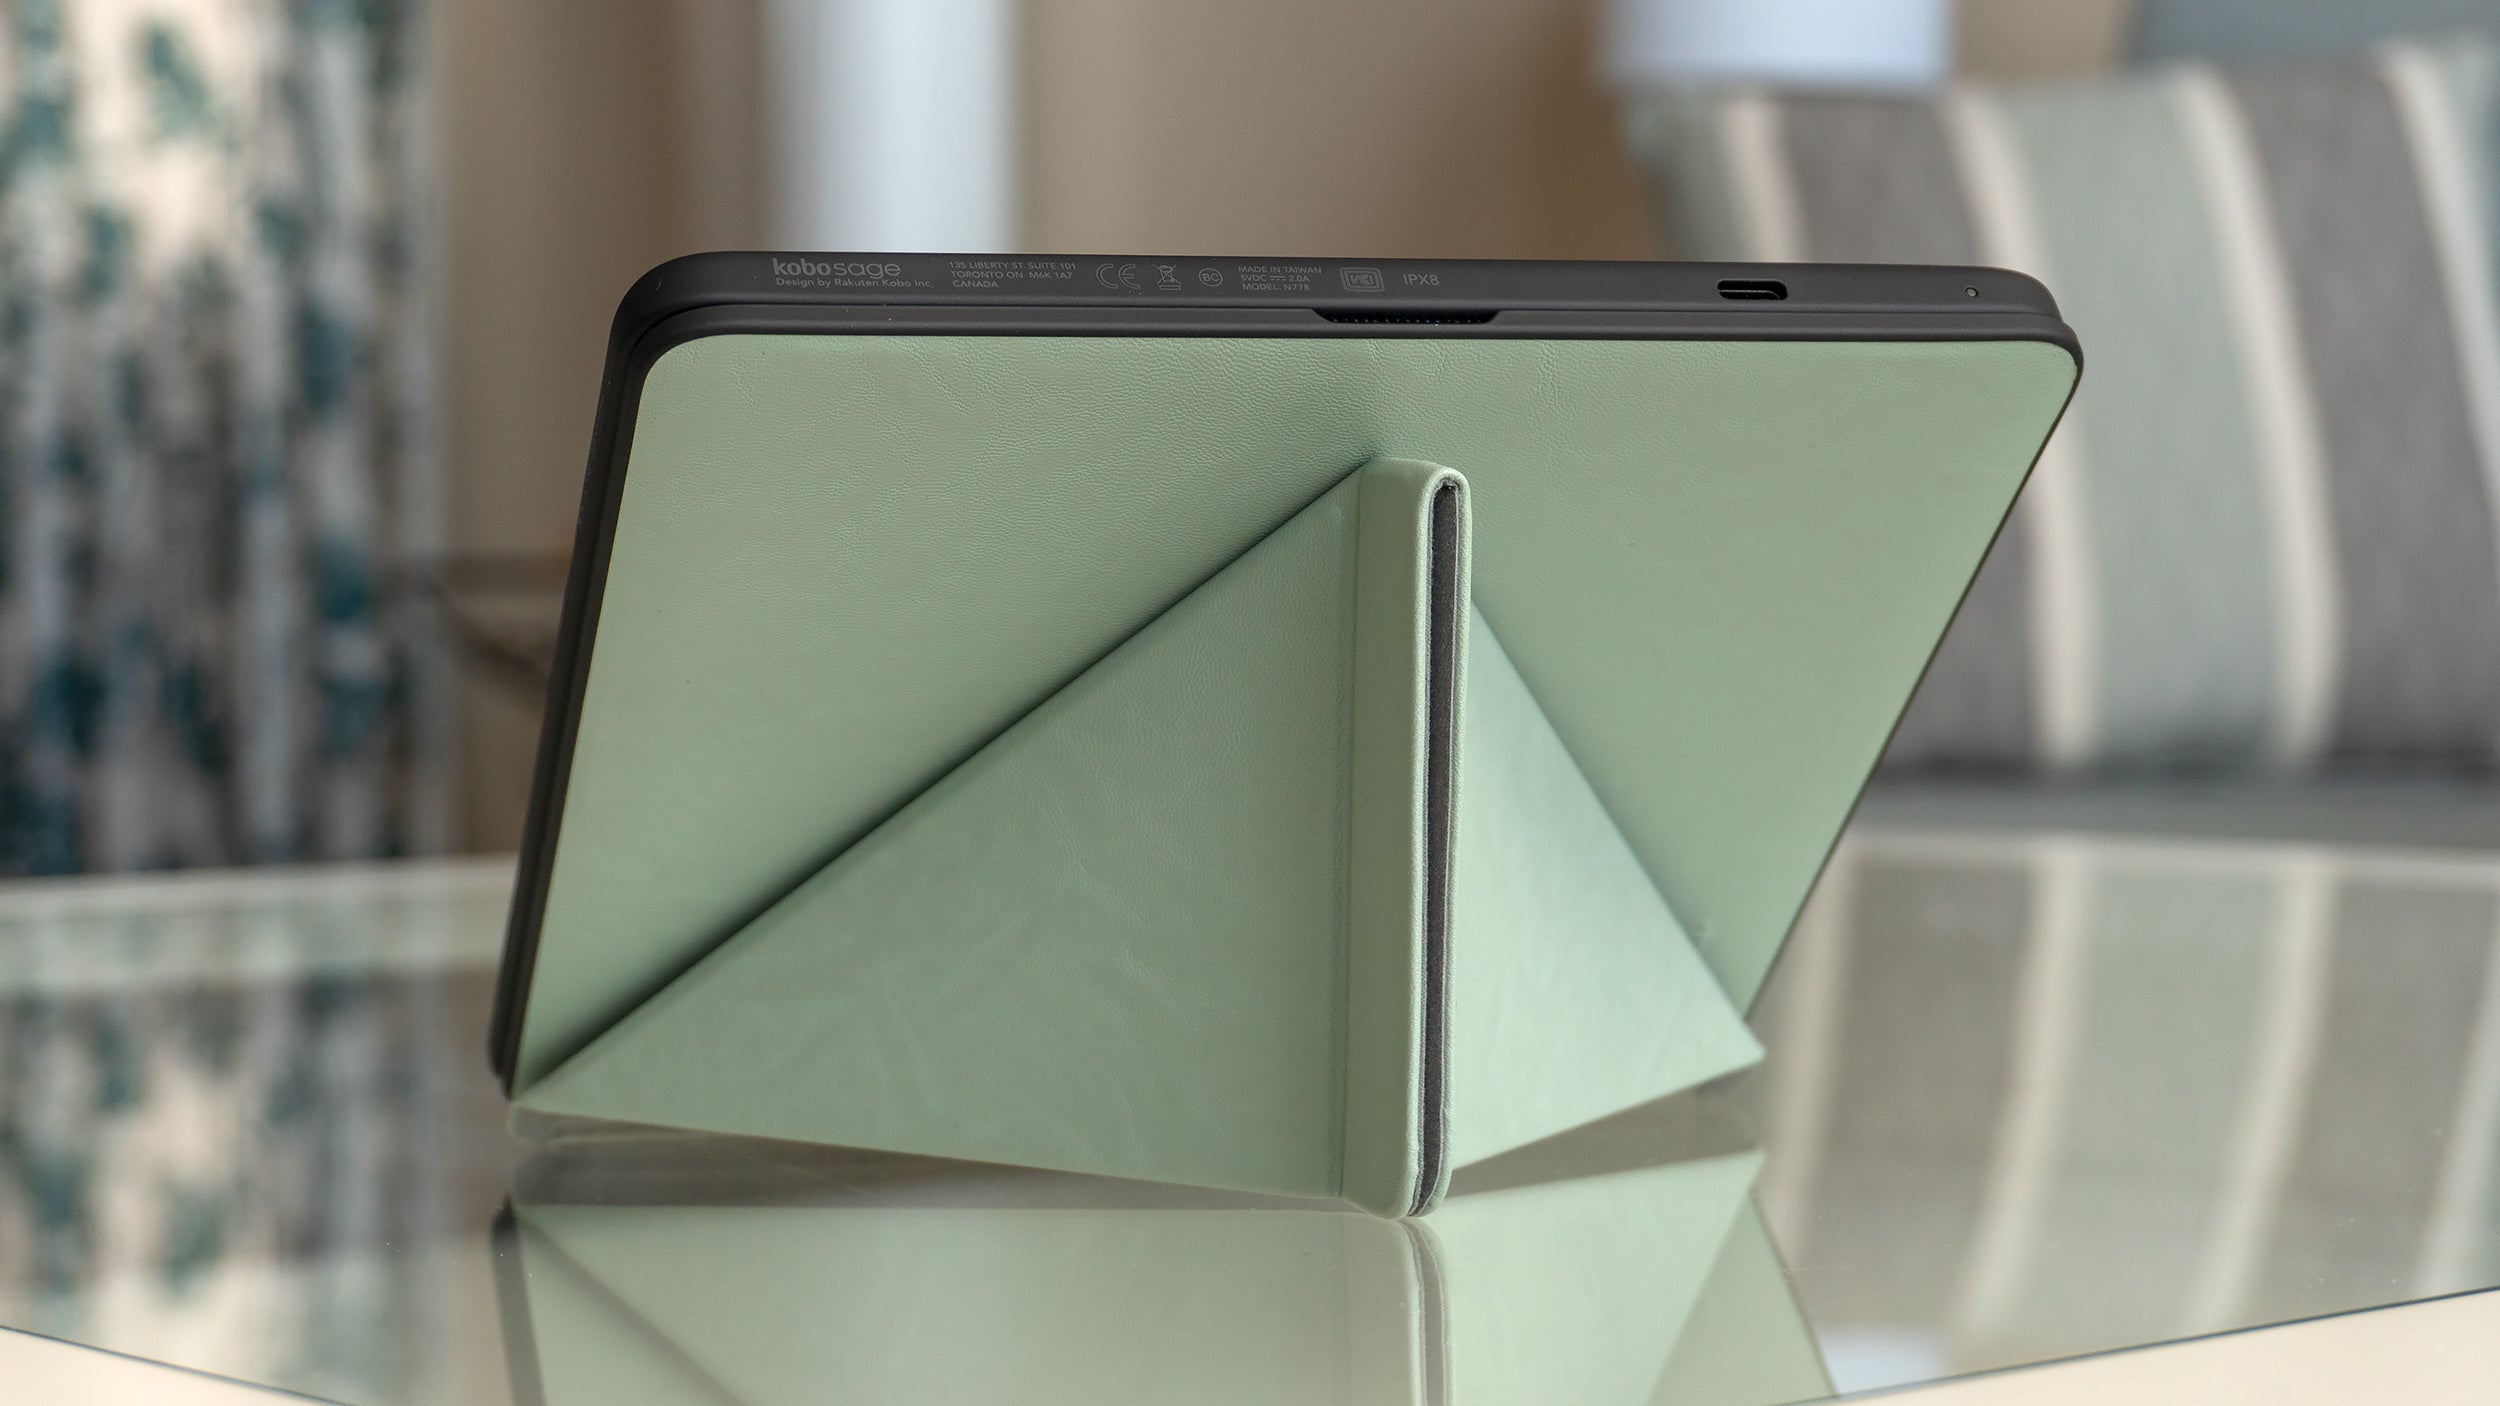 The lid of the Kobo SleepCover cleverly transforms into a display stand. (Photo: Andrew Liszewski - Gizmodo)